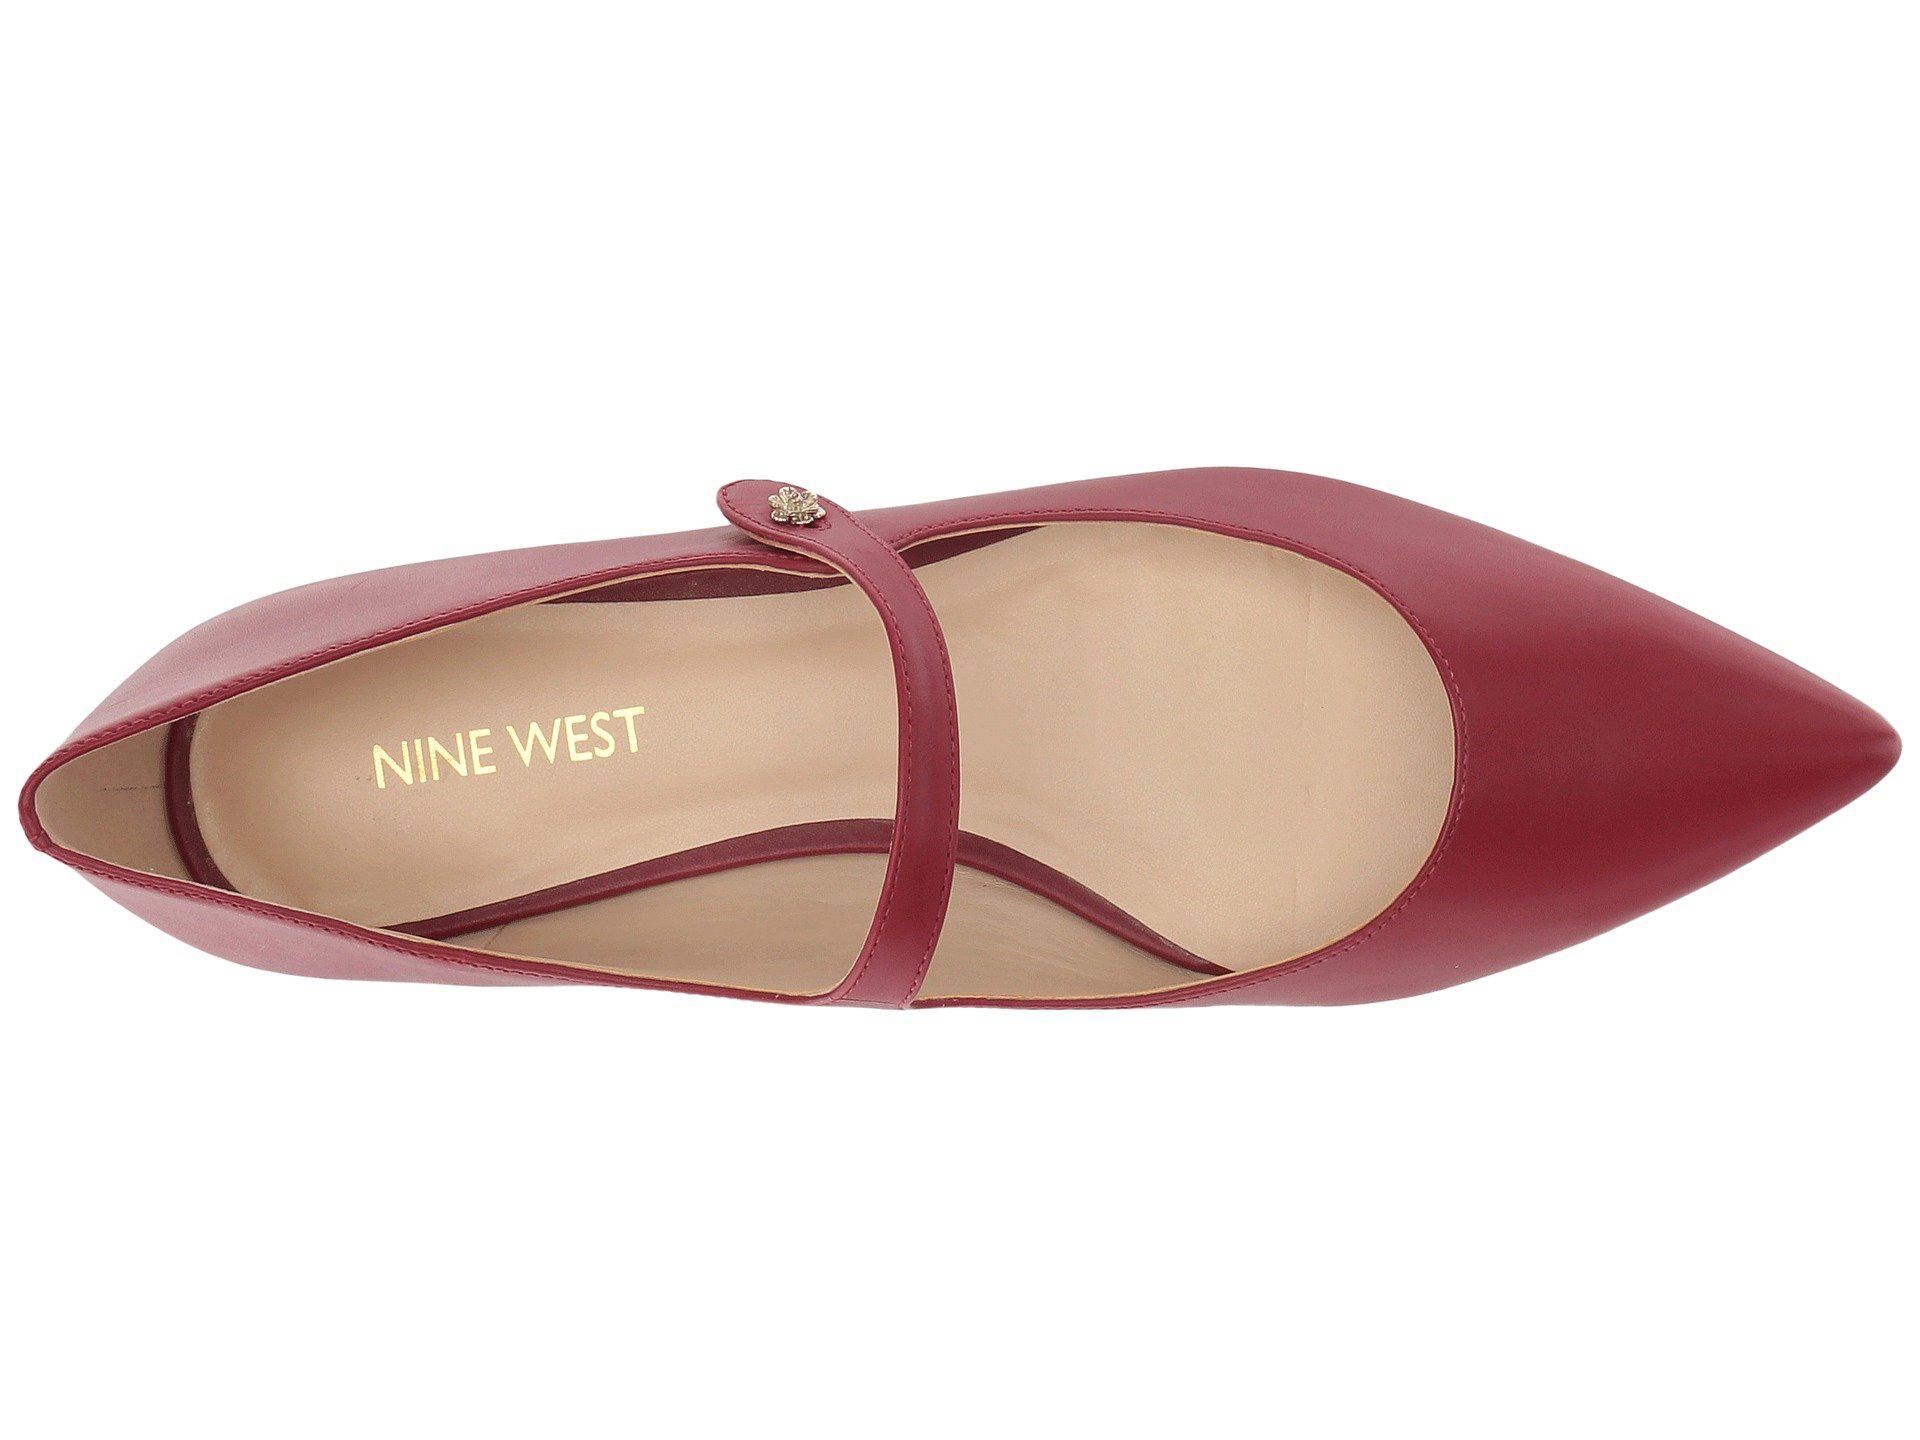 Nine West Ashby Mary Jane Flat in Red Leather (Red) - Lyst